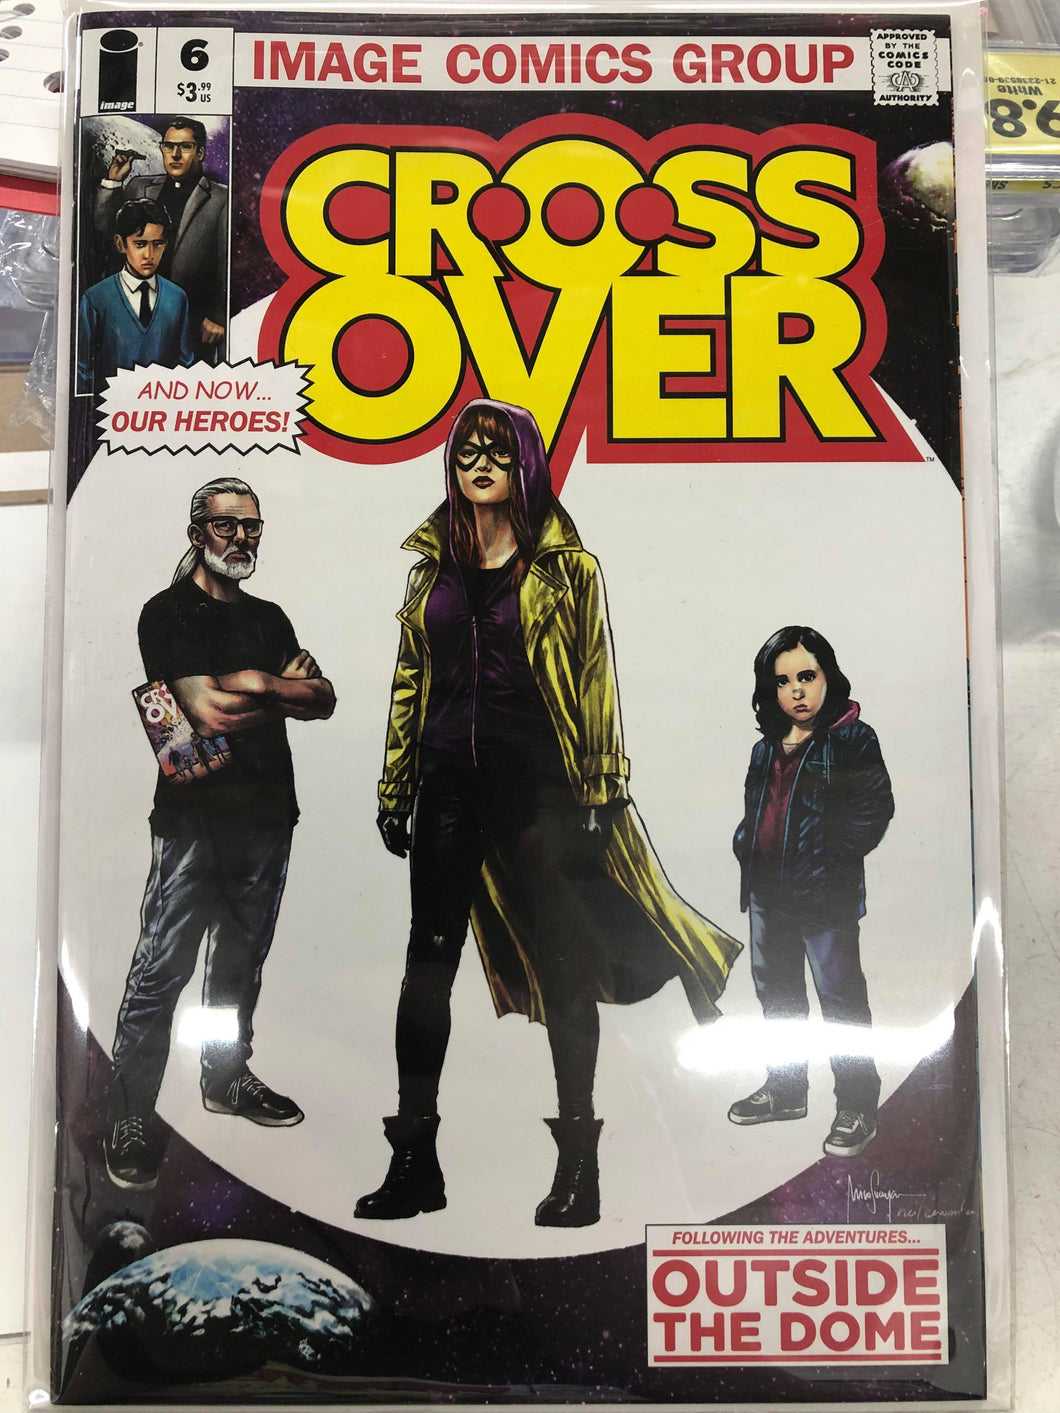 CROSSOVER #6 Homage Variant